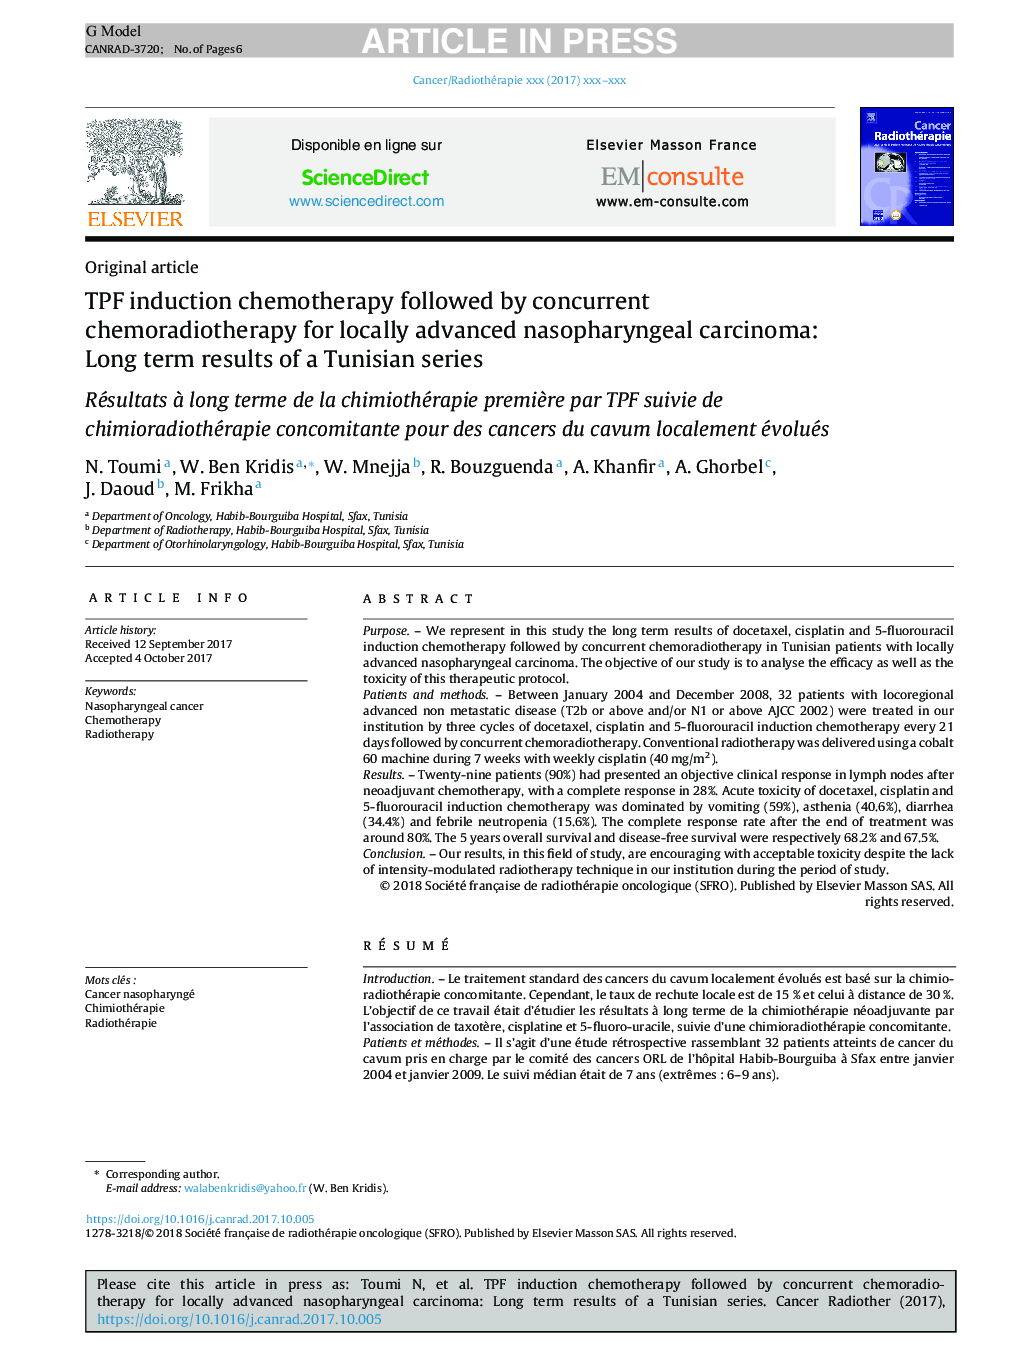 TPF induction chemotherapy followed by concurrent chemoradiotherapy for locally advanced nasopharyngeal carcinoma: Long term results of a Tunisian series